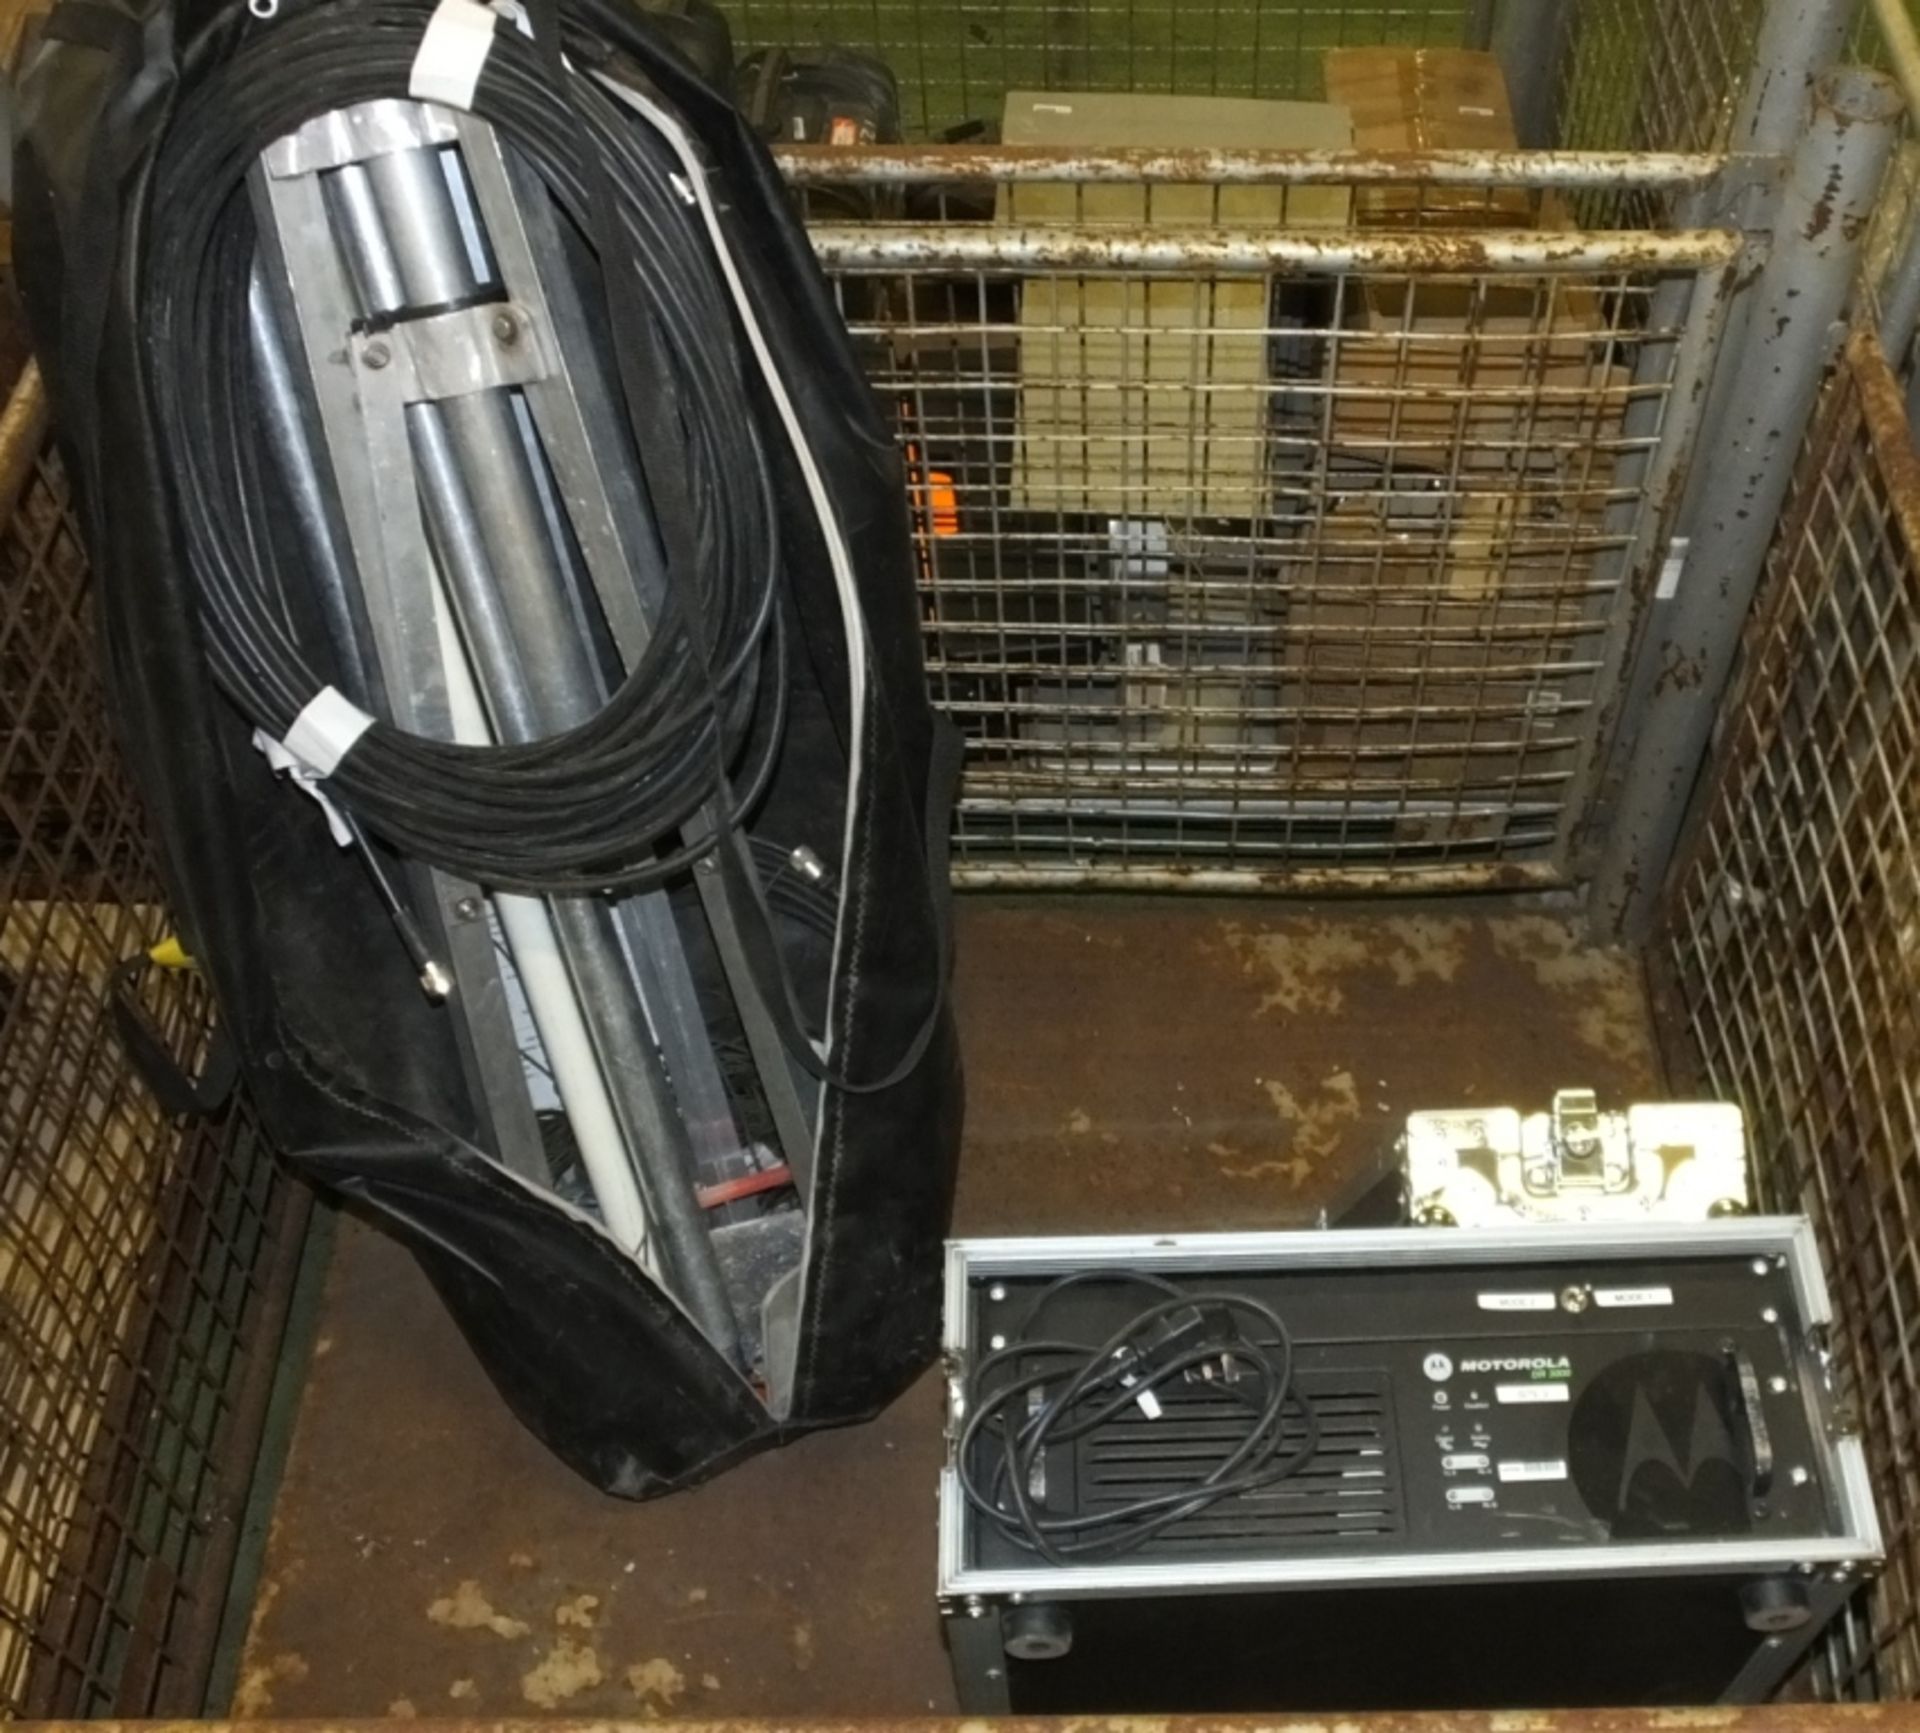 Motorola DR3000 Repeater in carry case, Arial Tri pod stand and associated cables in carry